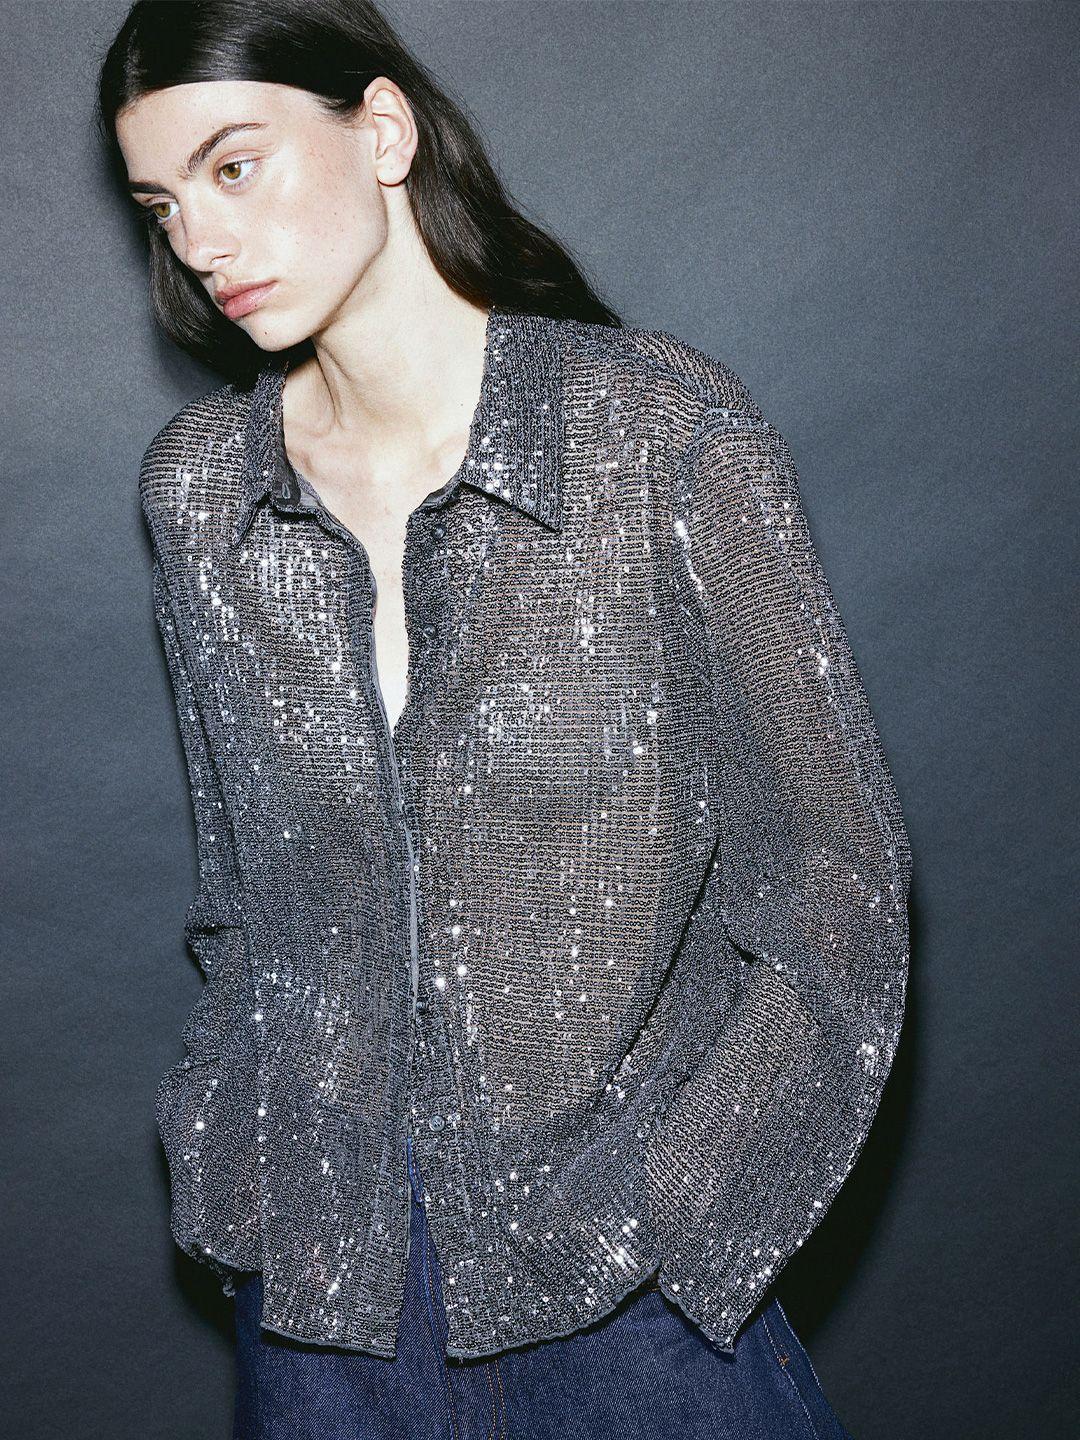 h&m-sequined-blouse